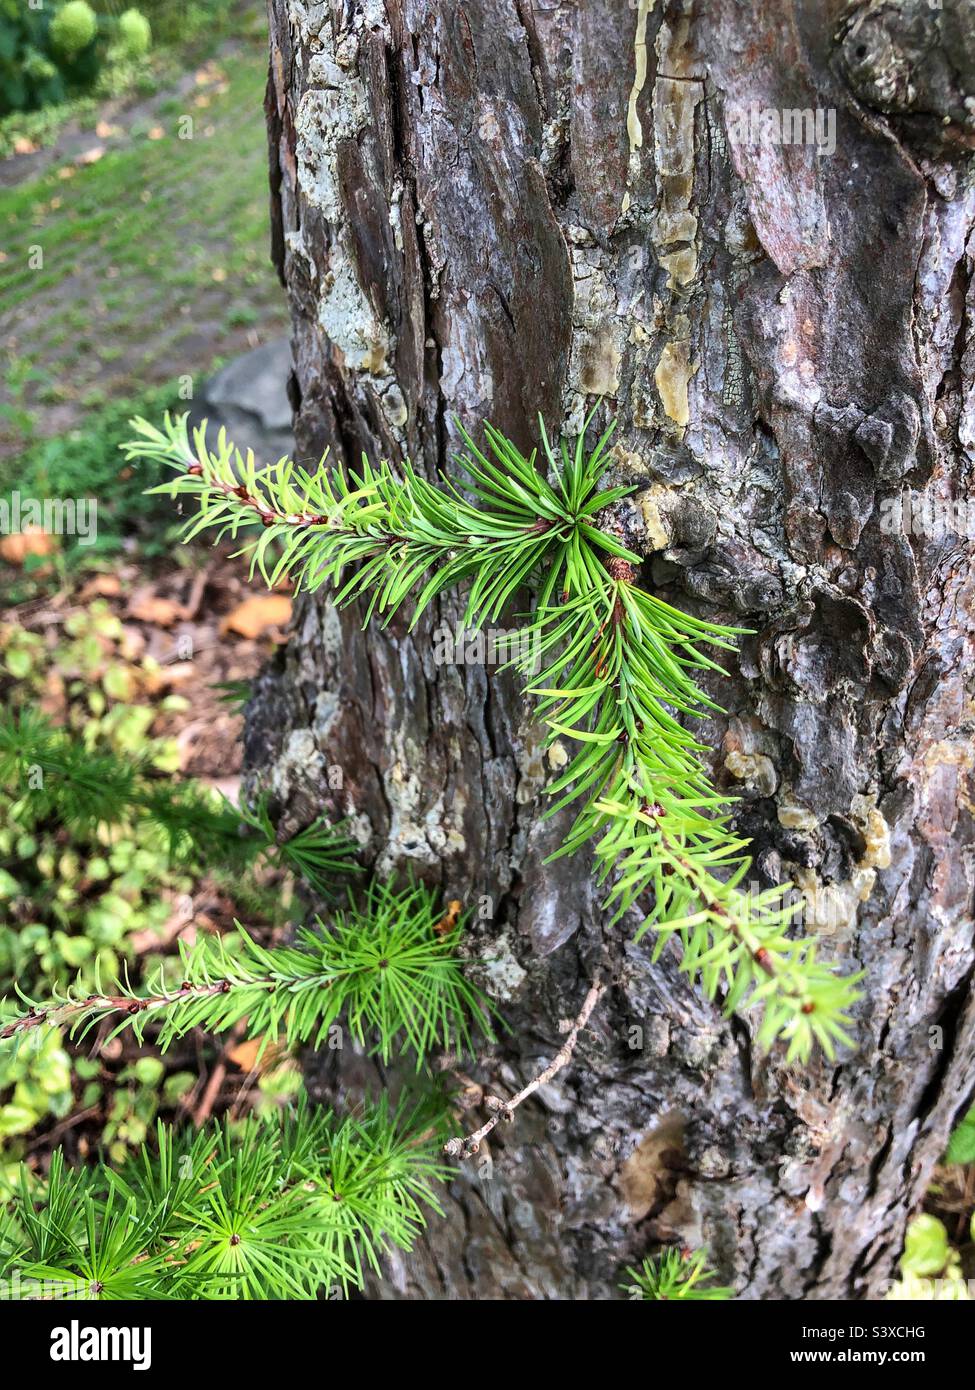 Young growth on a tree trunk. Stock Photo